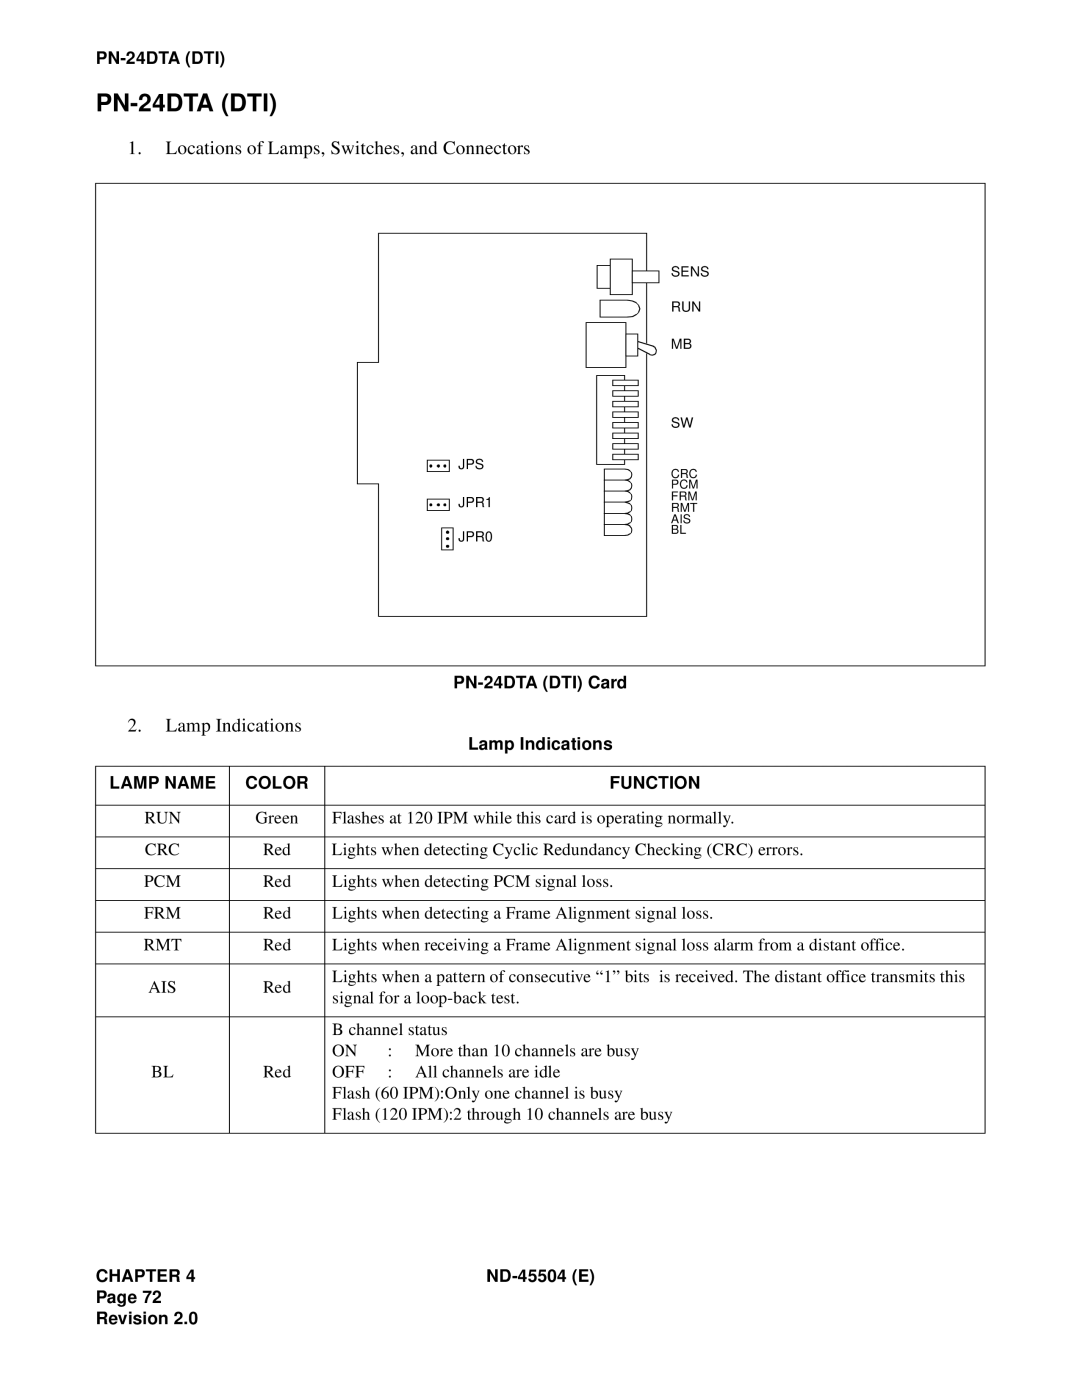 NEC 2000 IVS manual Locations of Lamps, Switches, and Connectors, Lamp Indications, PN-24DTADTI Card, Lamp Name, Color 